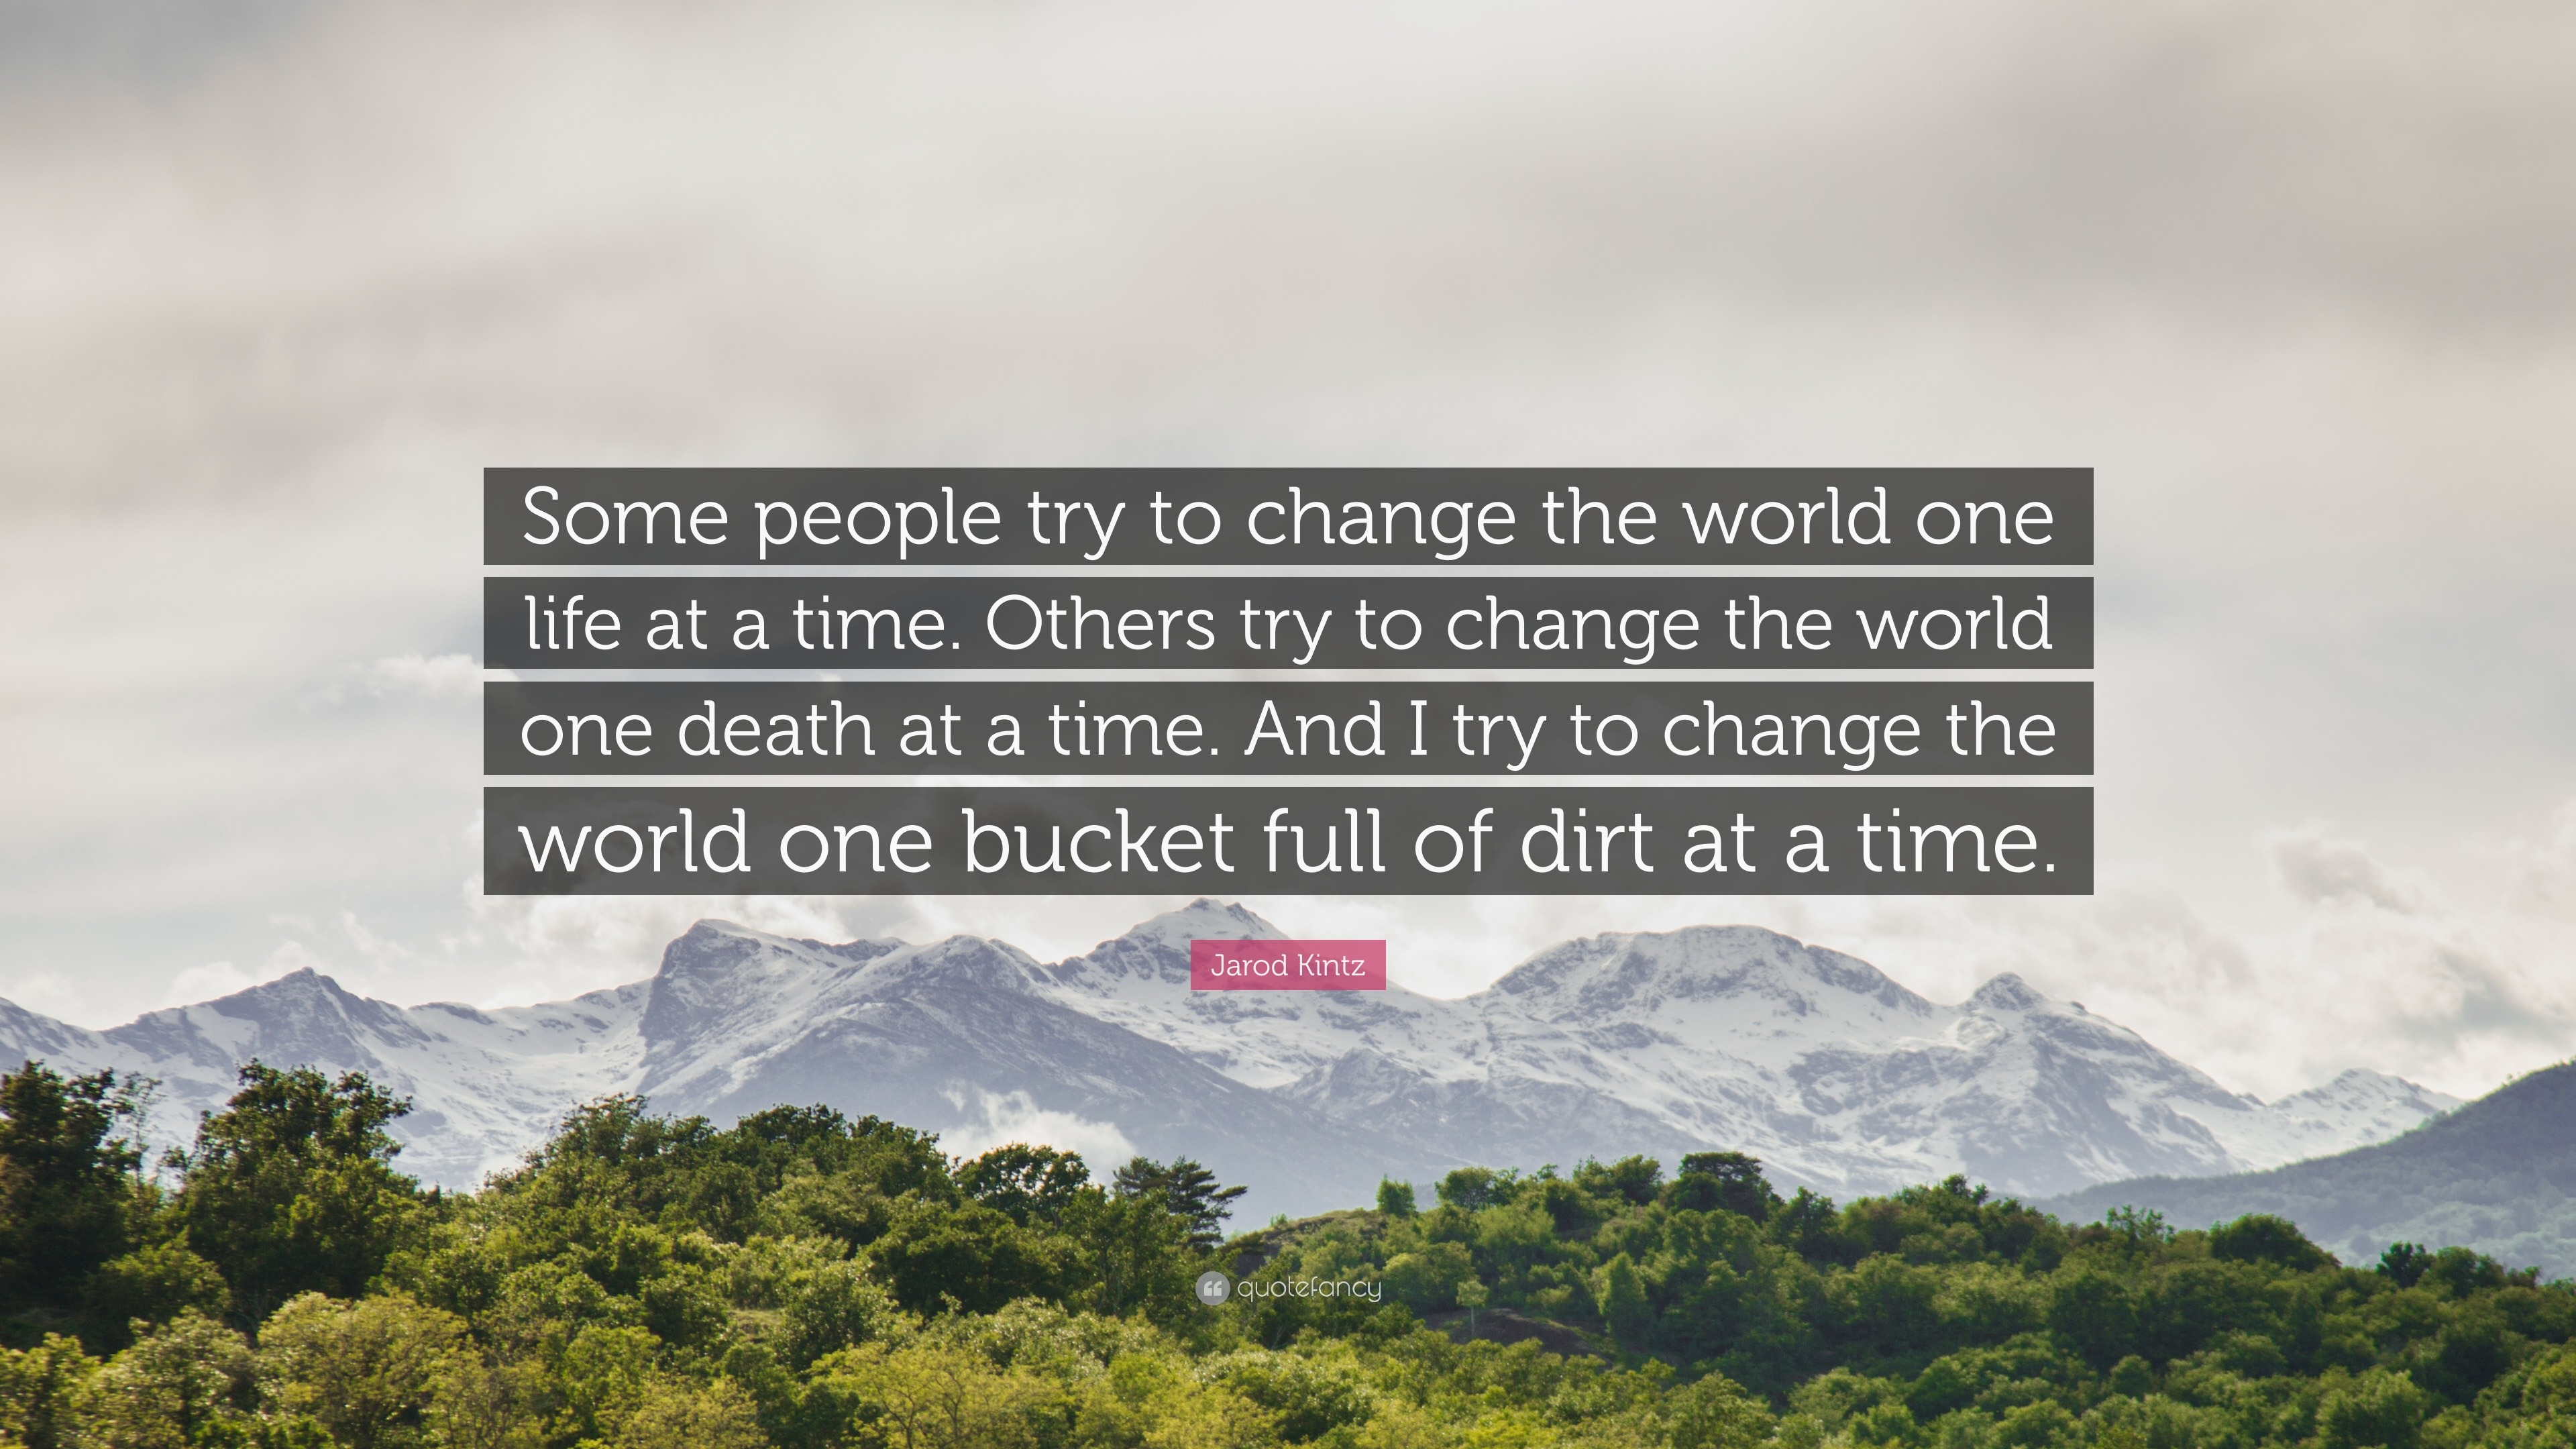 Jarod Kintz Quote: “Some people try to change the world one life